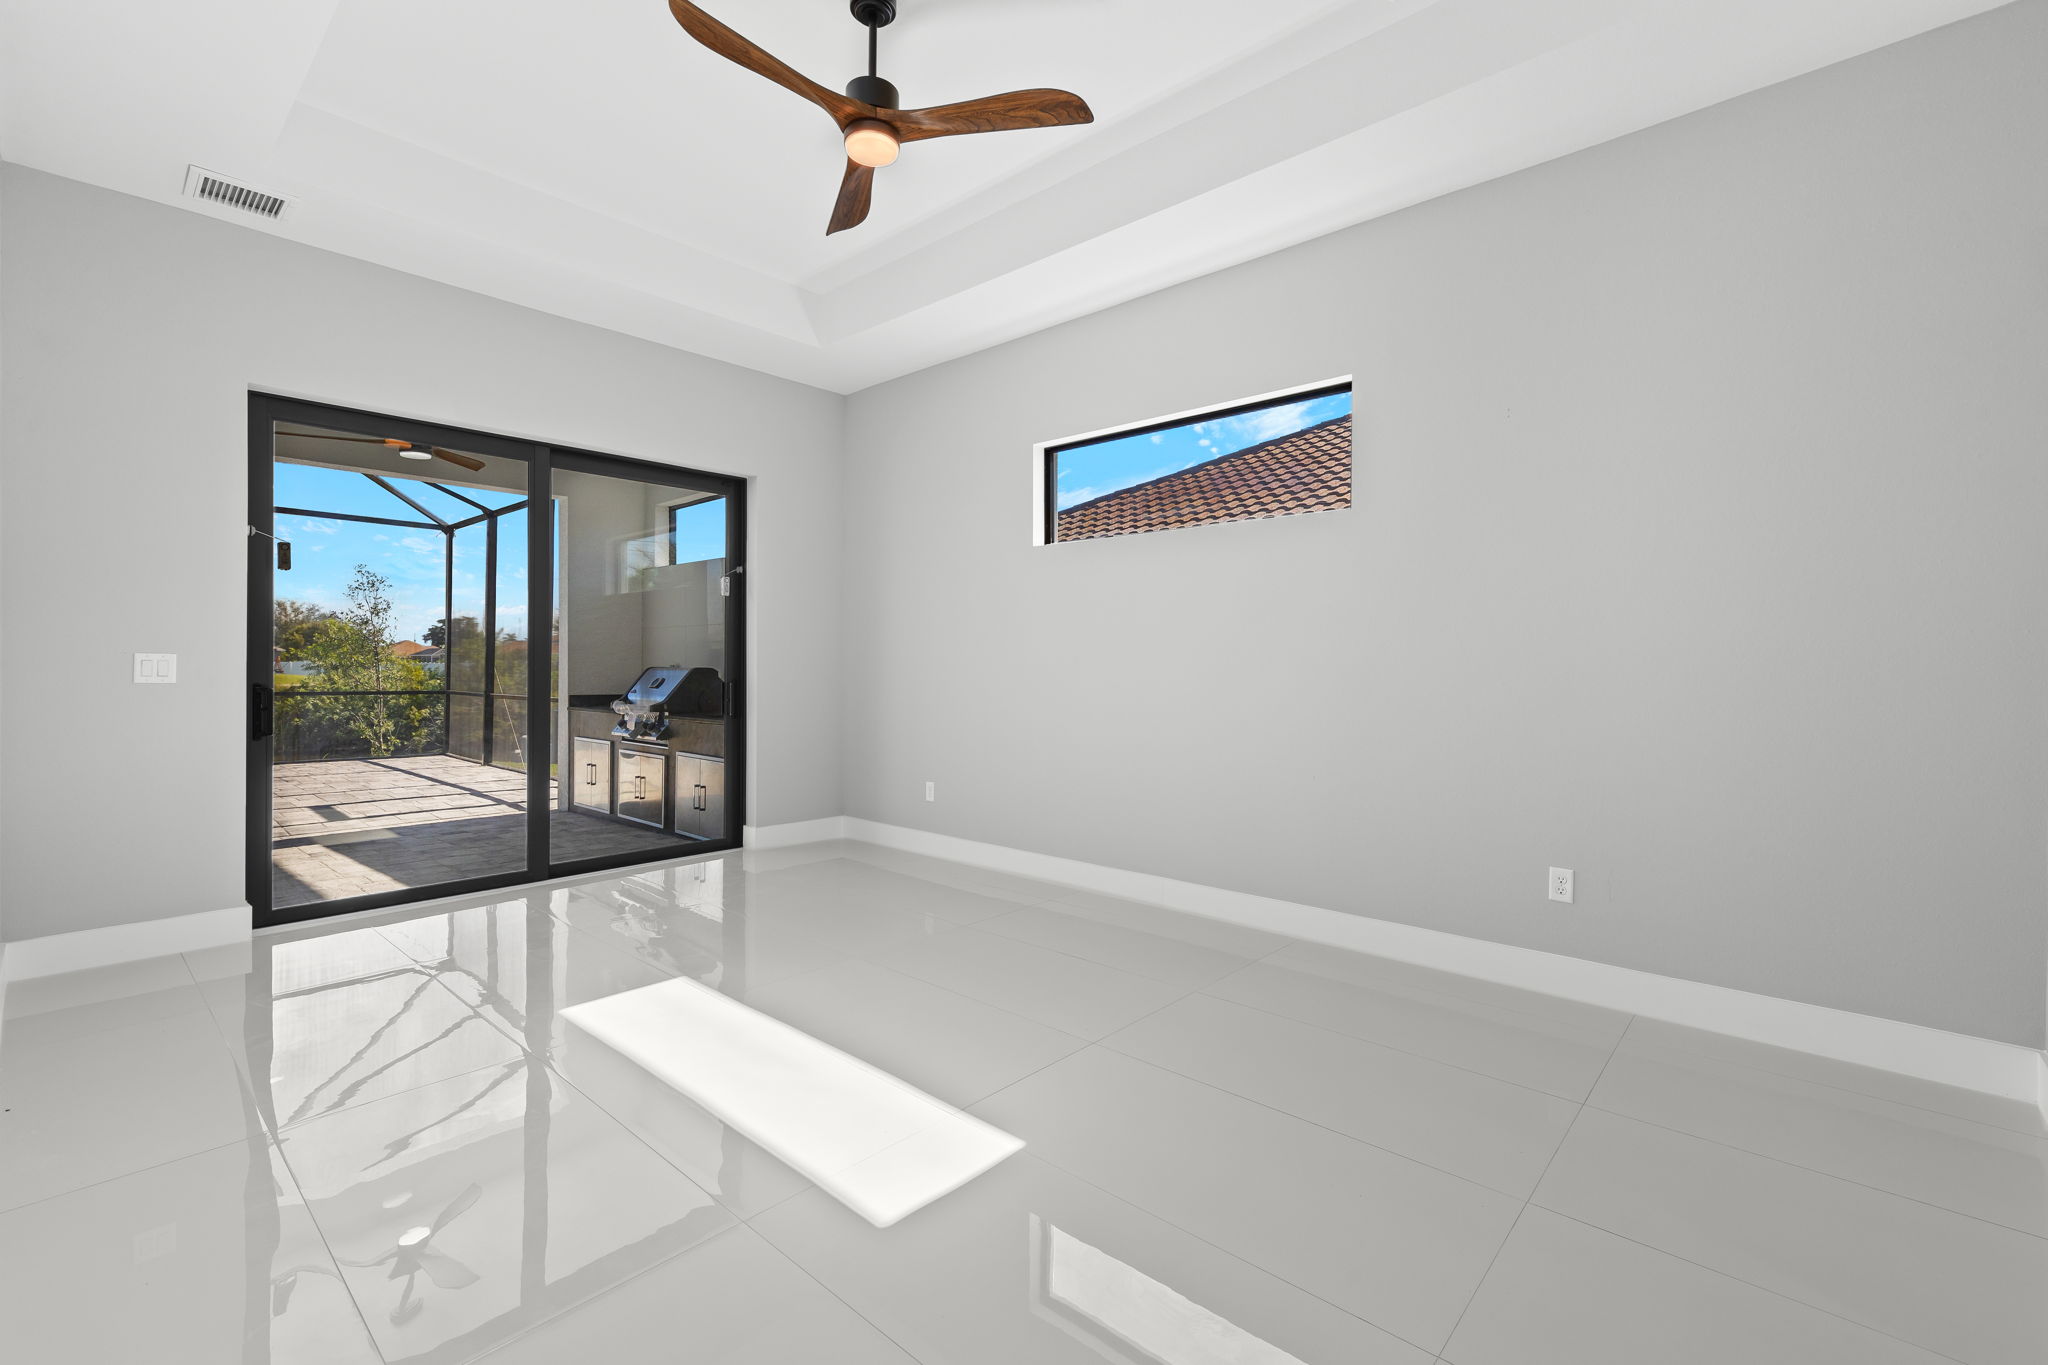 Virtual staging